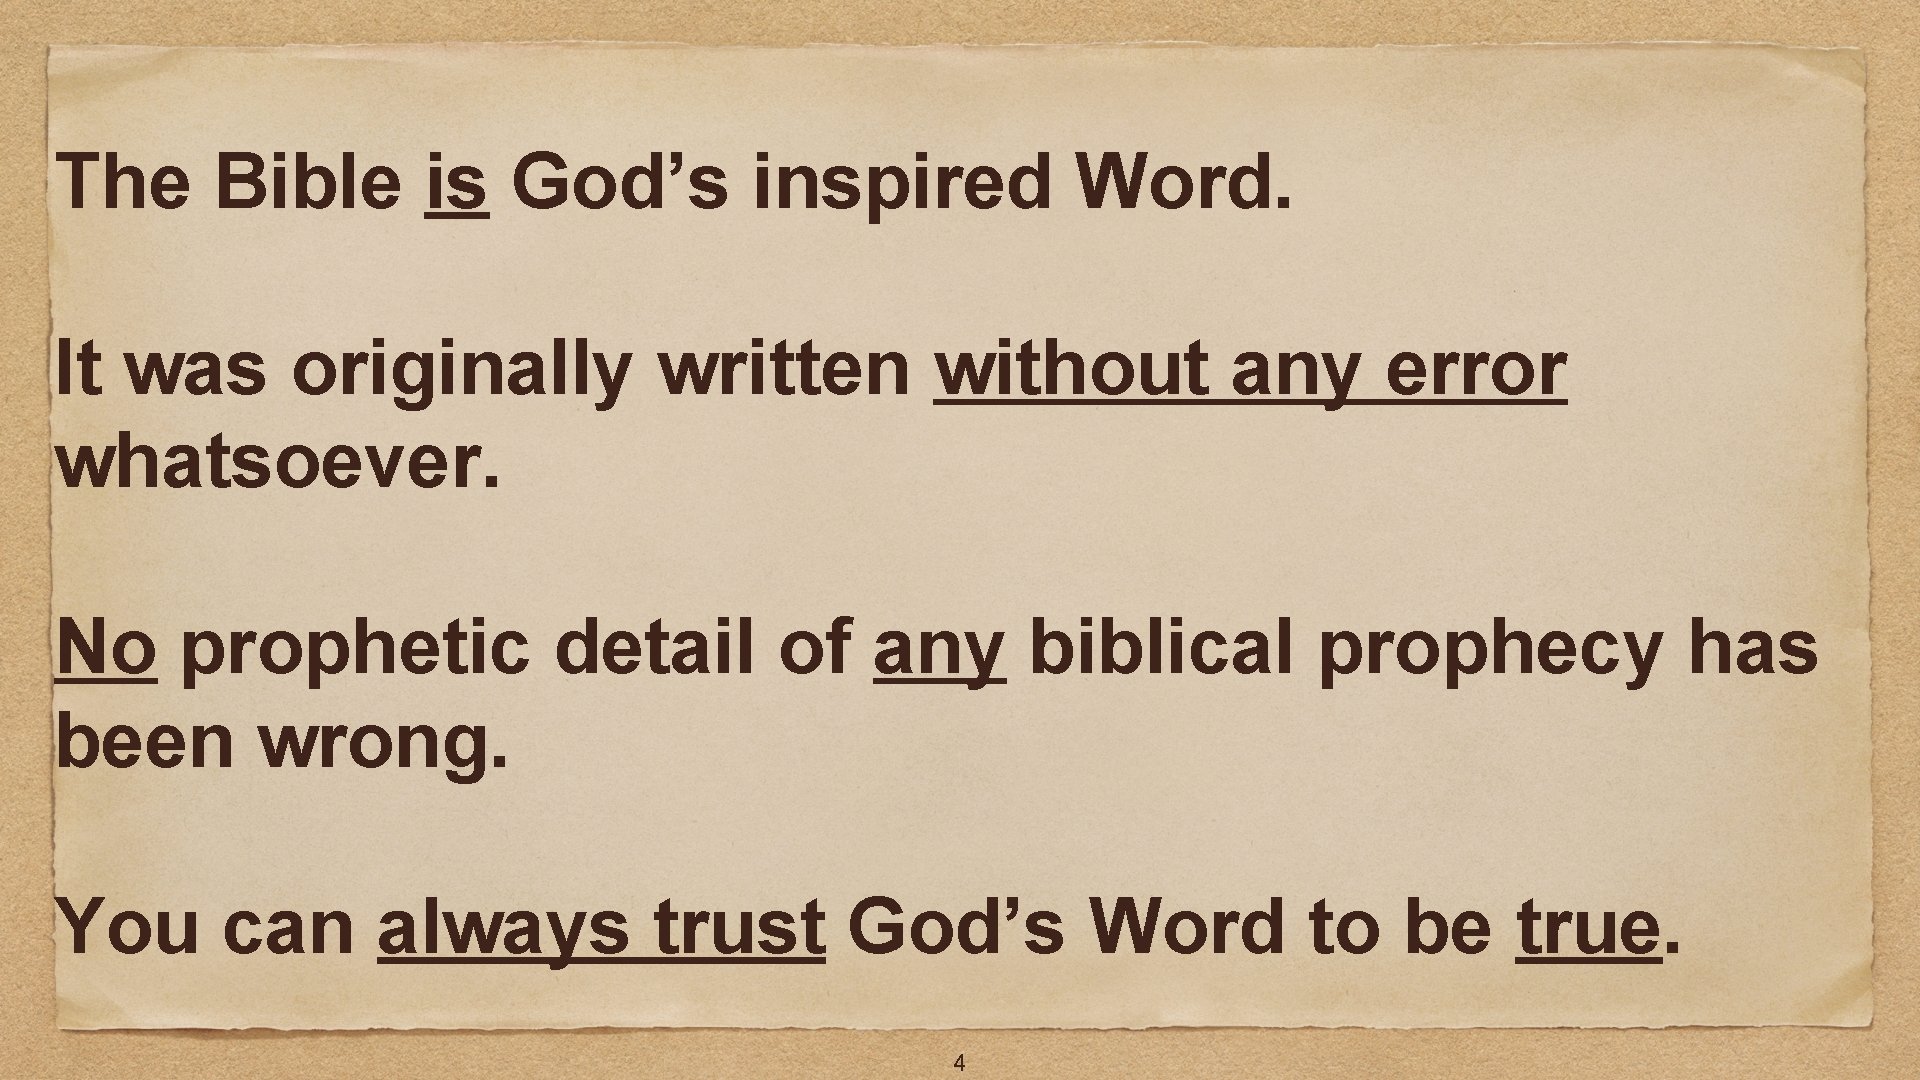 The Bible is God’s inspired Word. It was originally written without any error whatsoever.